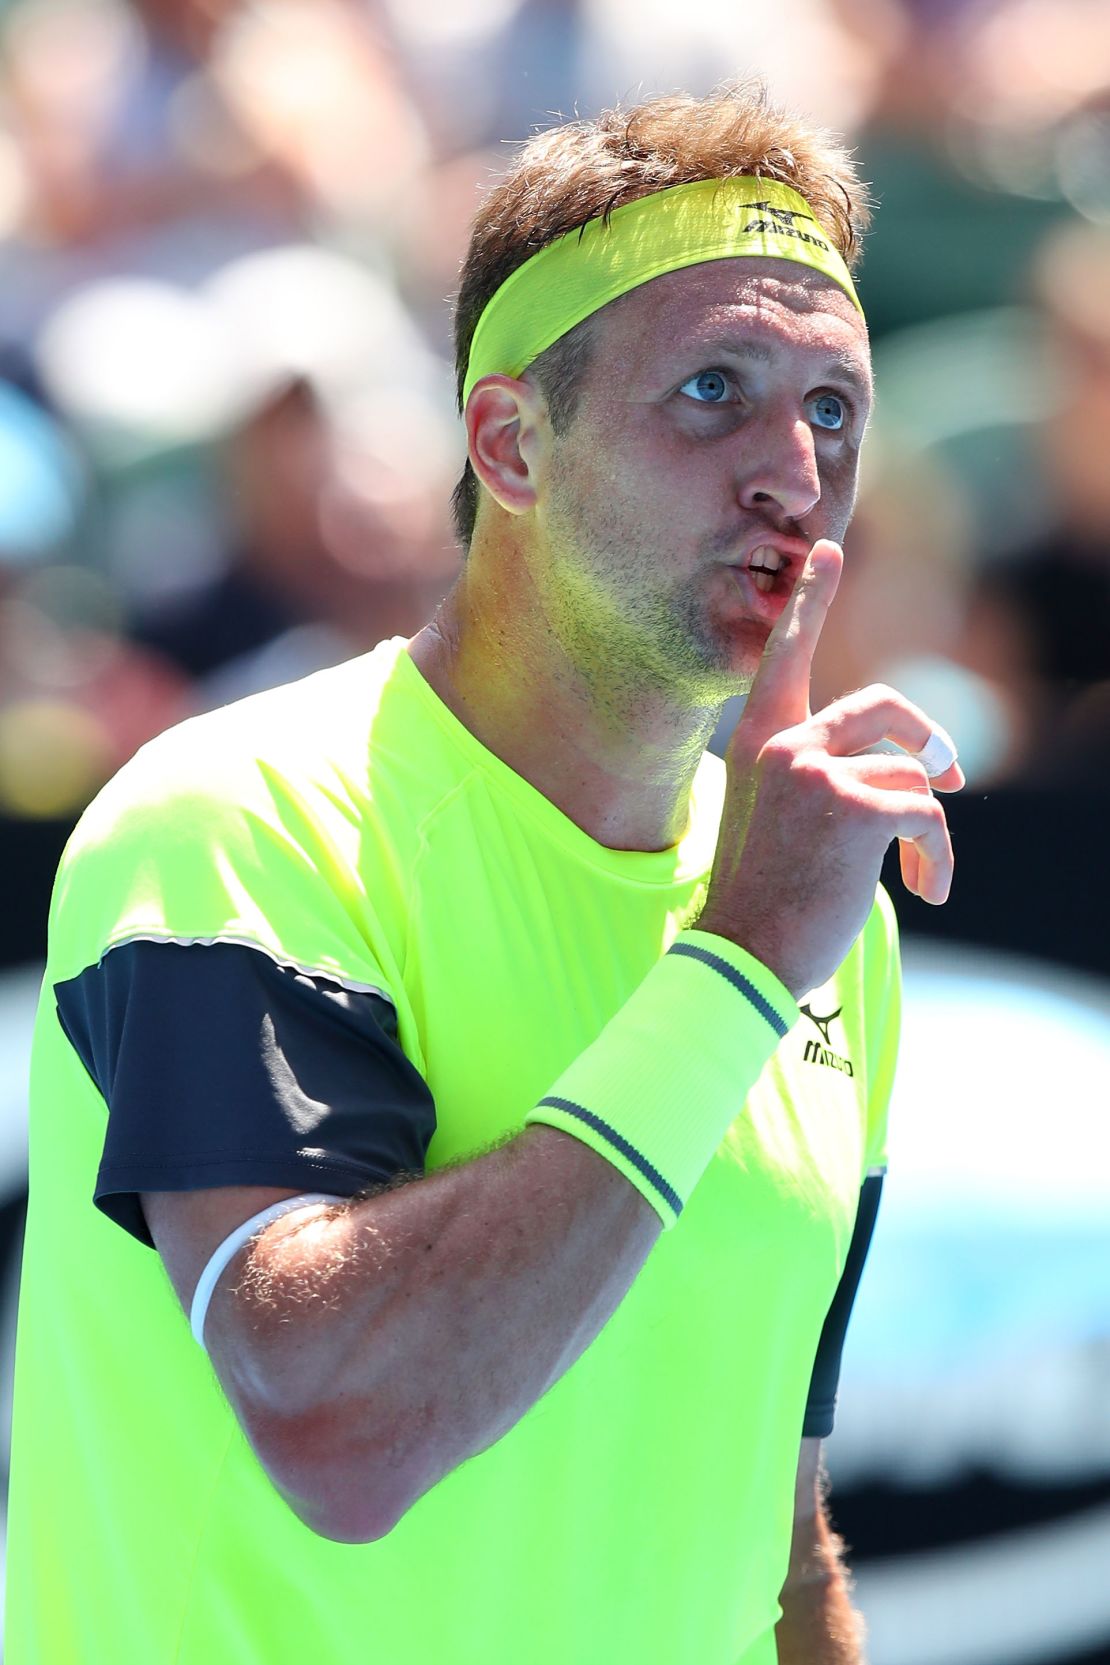 Tennys Sandgren on court during his quarterfinal match against Hyeon Chung in Melbourne.